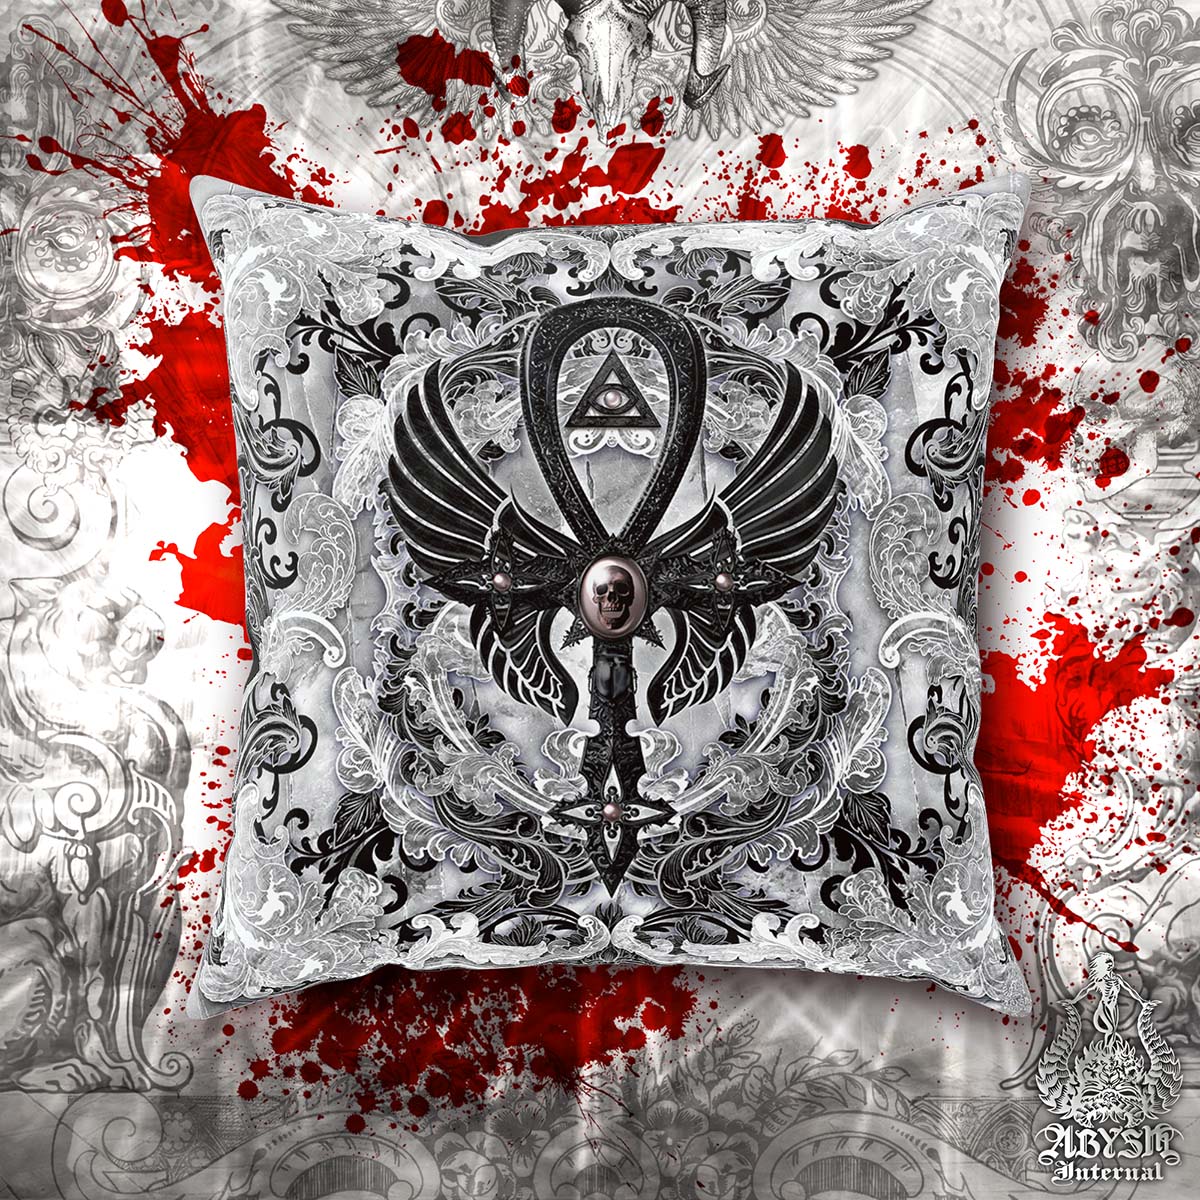 Gothic Throw Pillows - Art Prints, Decor and Gifts, Ankh Cross - Abysm Internal